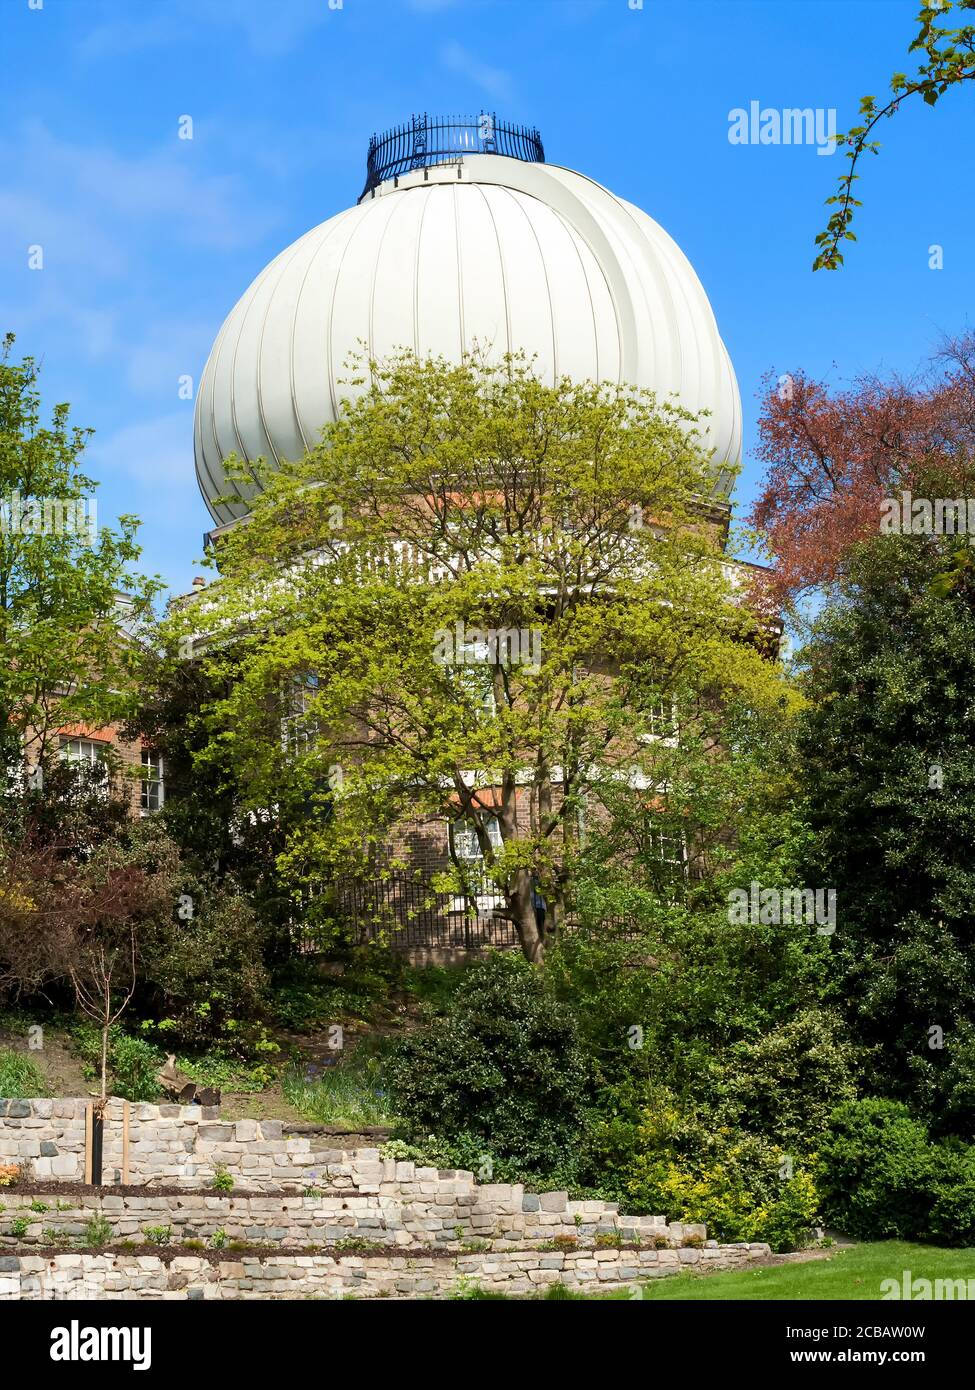 The Royal Observatory museum in Greenwich London England UK a Victorian 19th century building which is a popular travel destination tourist attraction Stock Photo